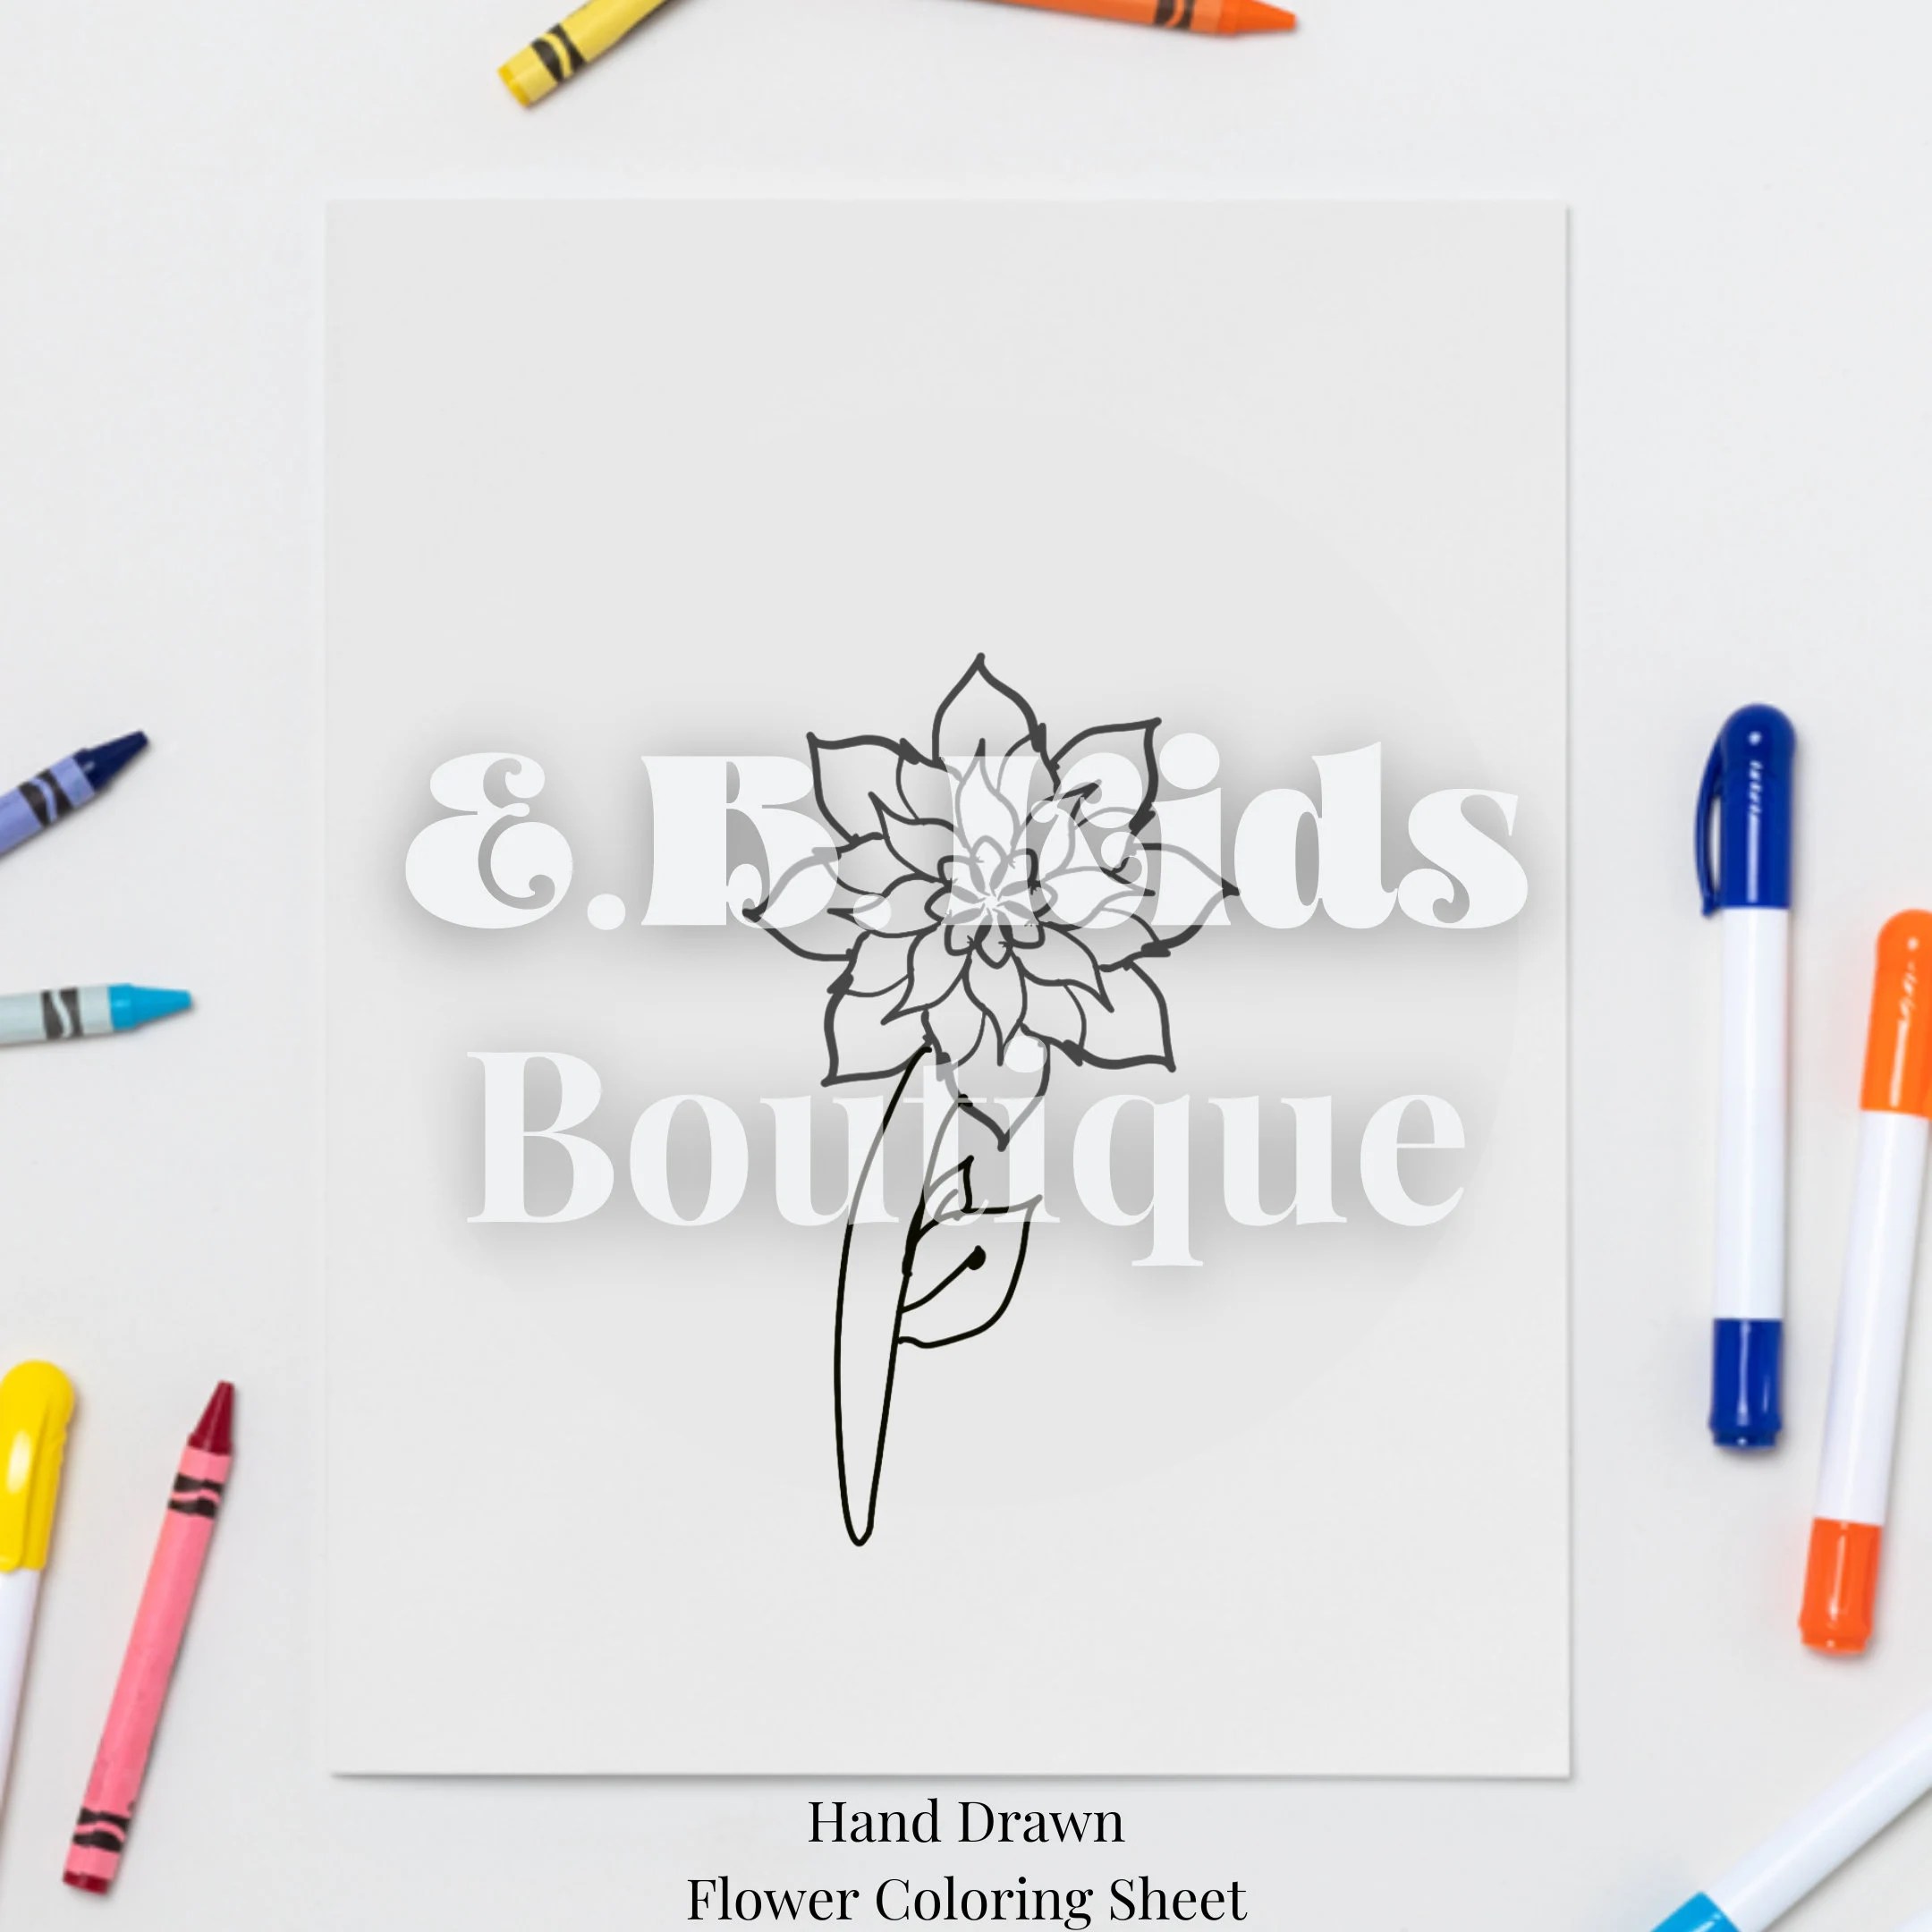 Flower Coloring Book Page  in Volume 2 | Edit In Canva  | Hand Drawn, Ready-to-print Digital | Purchase Includes Up To 30 Bonus Pages